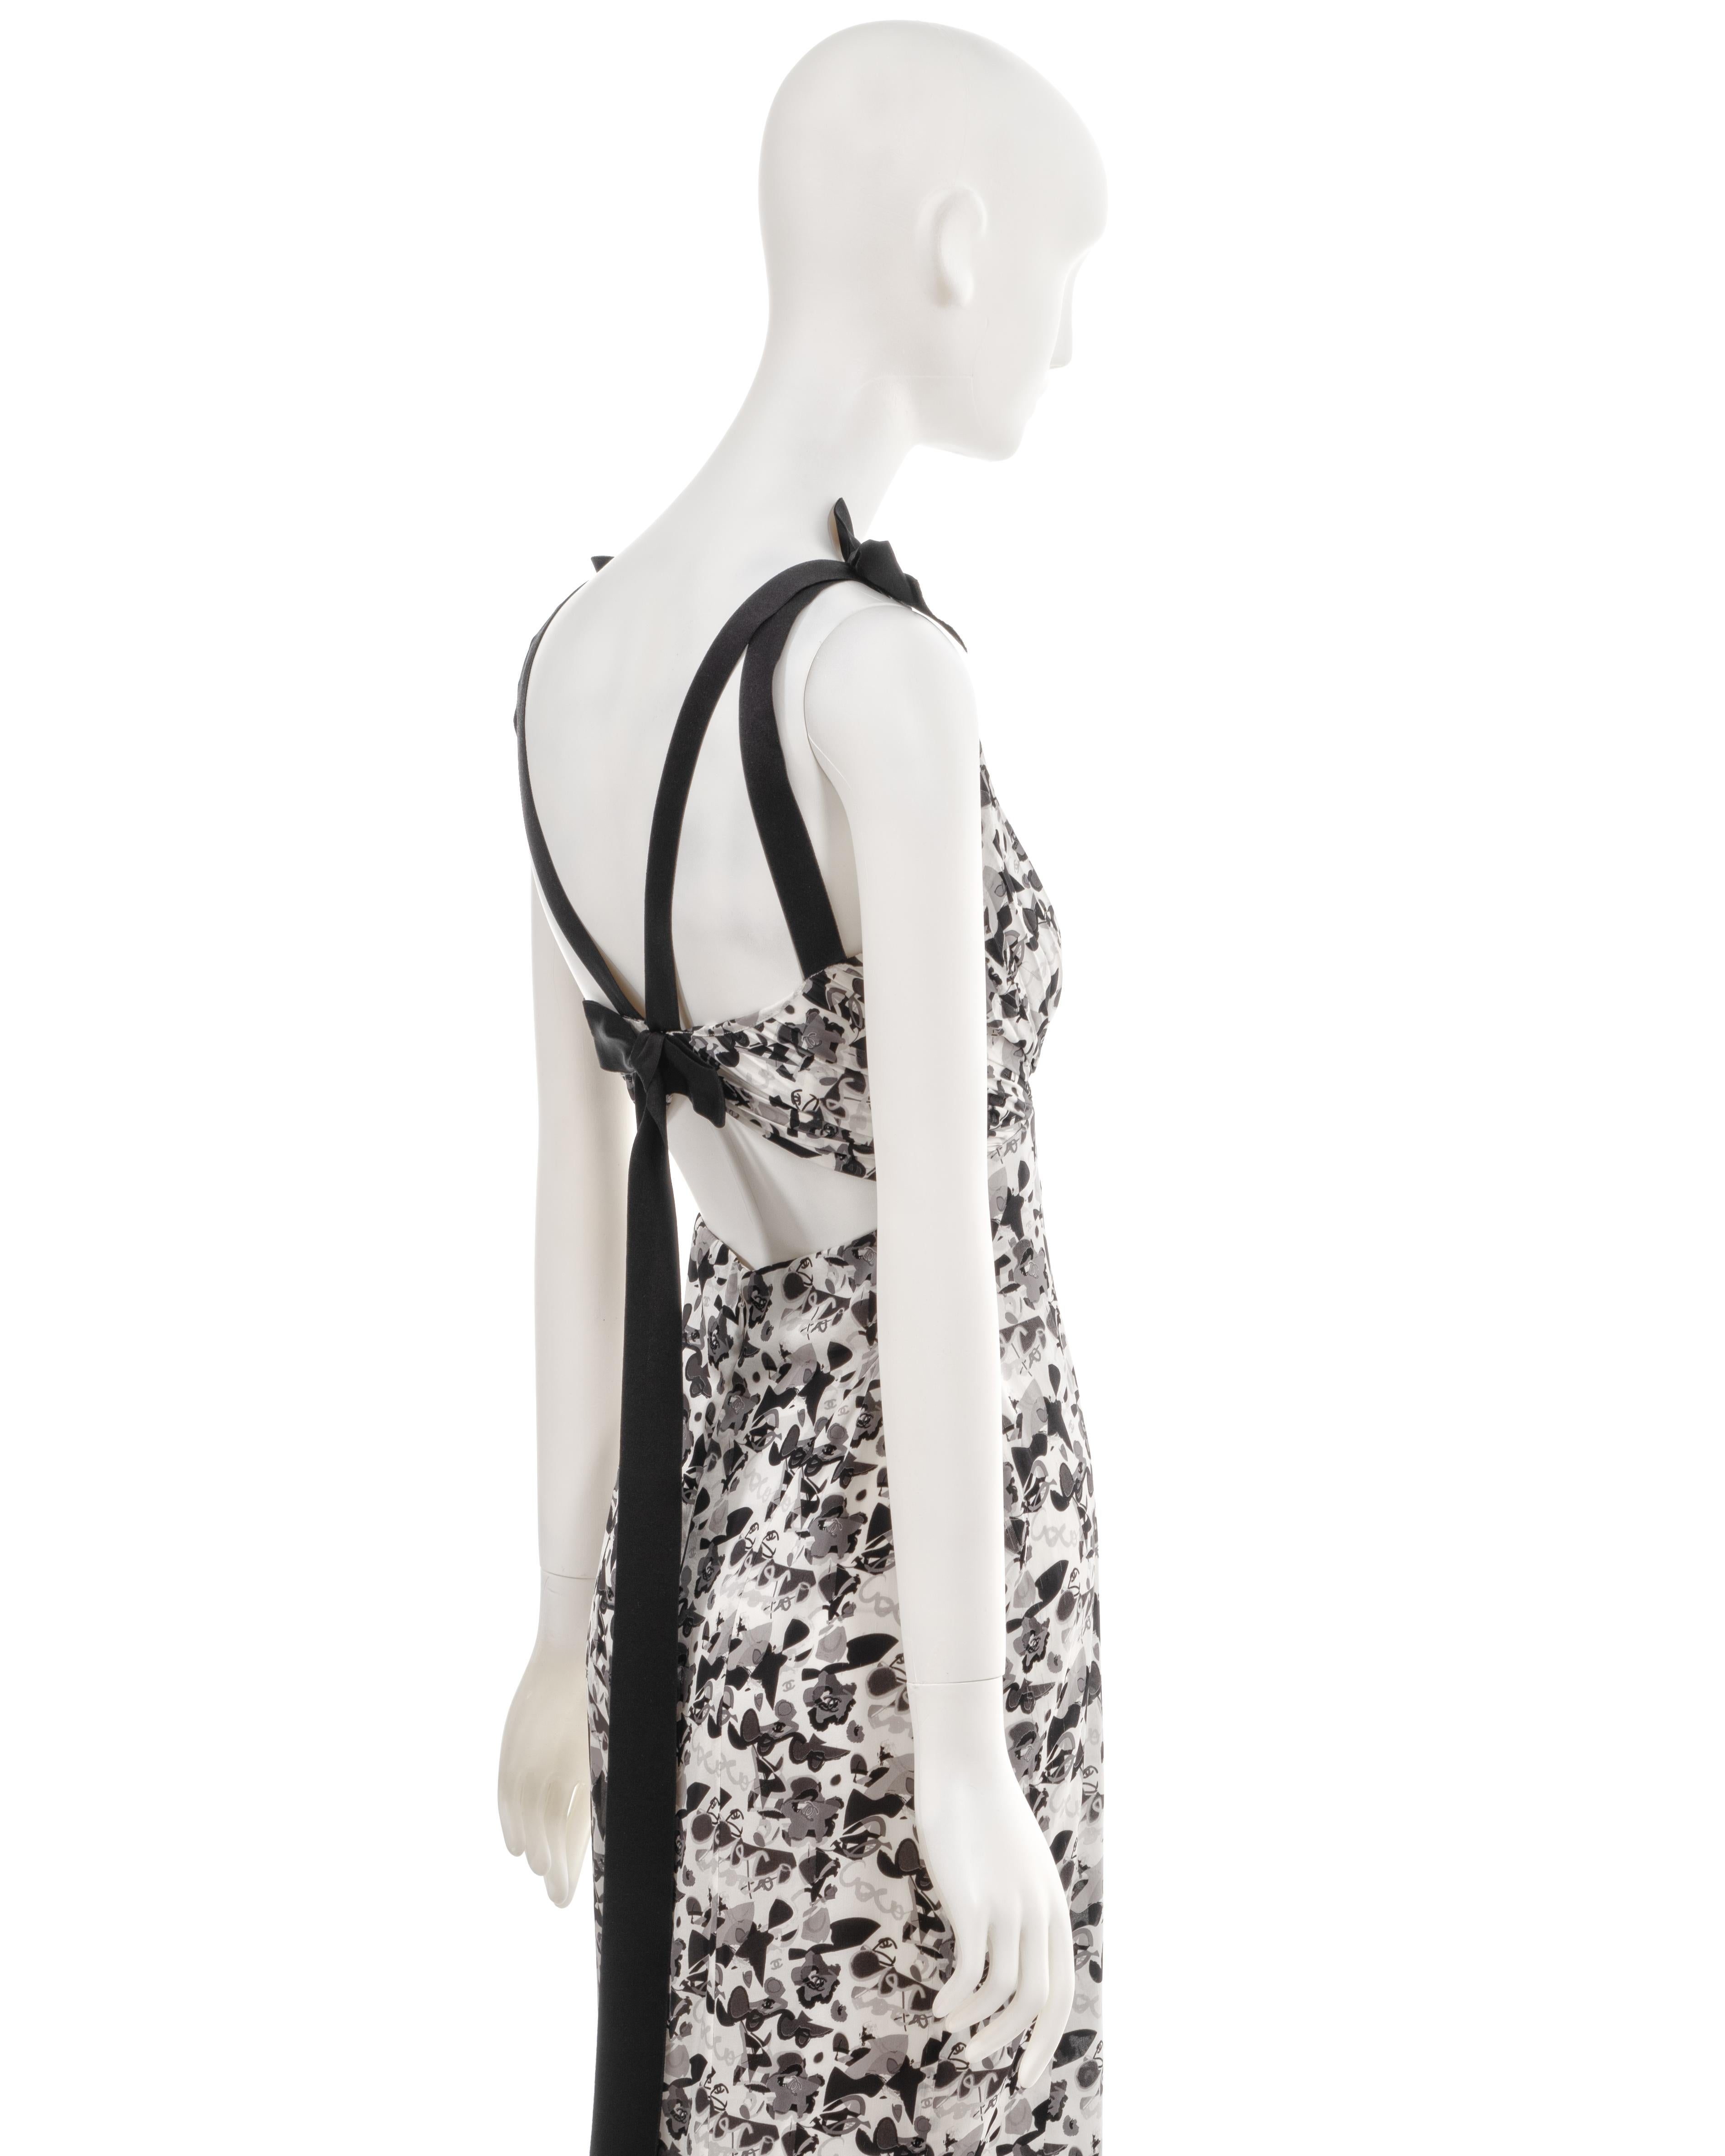 Chanel by Karl Lagerfeld white printed silk evening dress with bows, ss 2005  For Sale 4